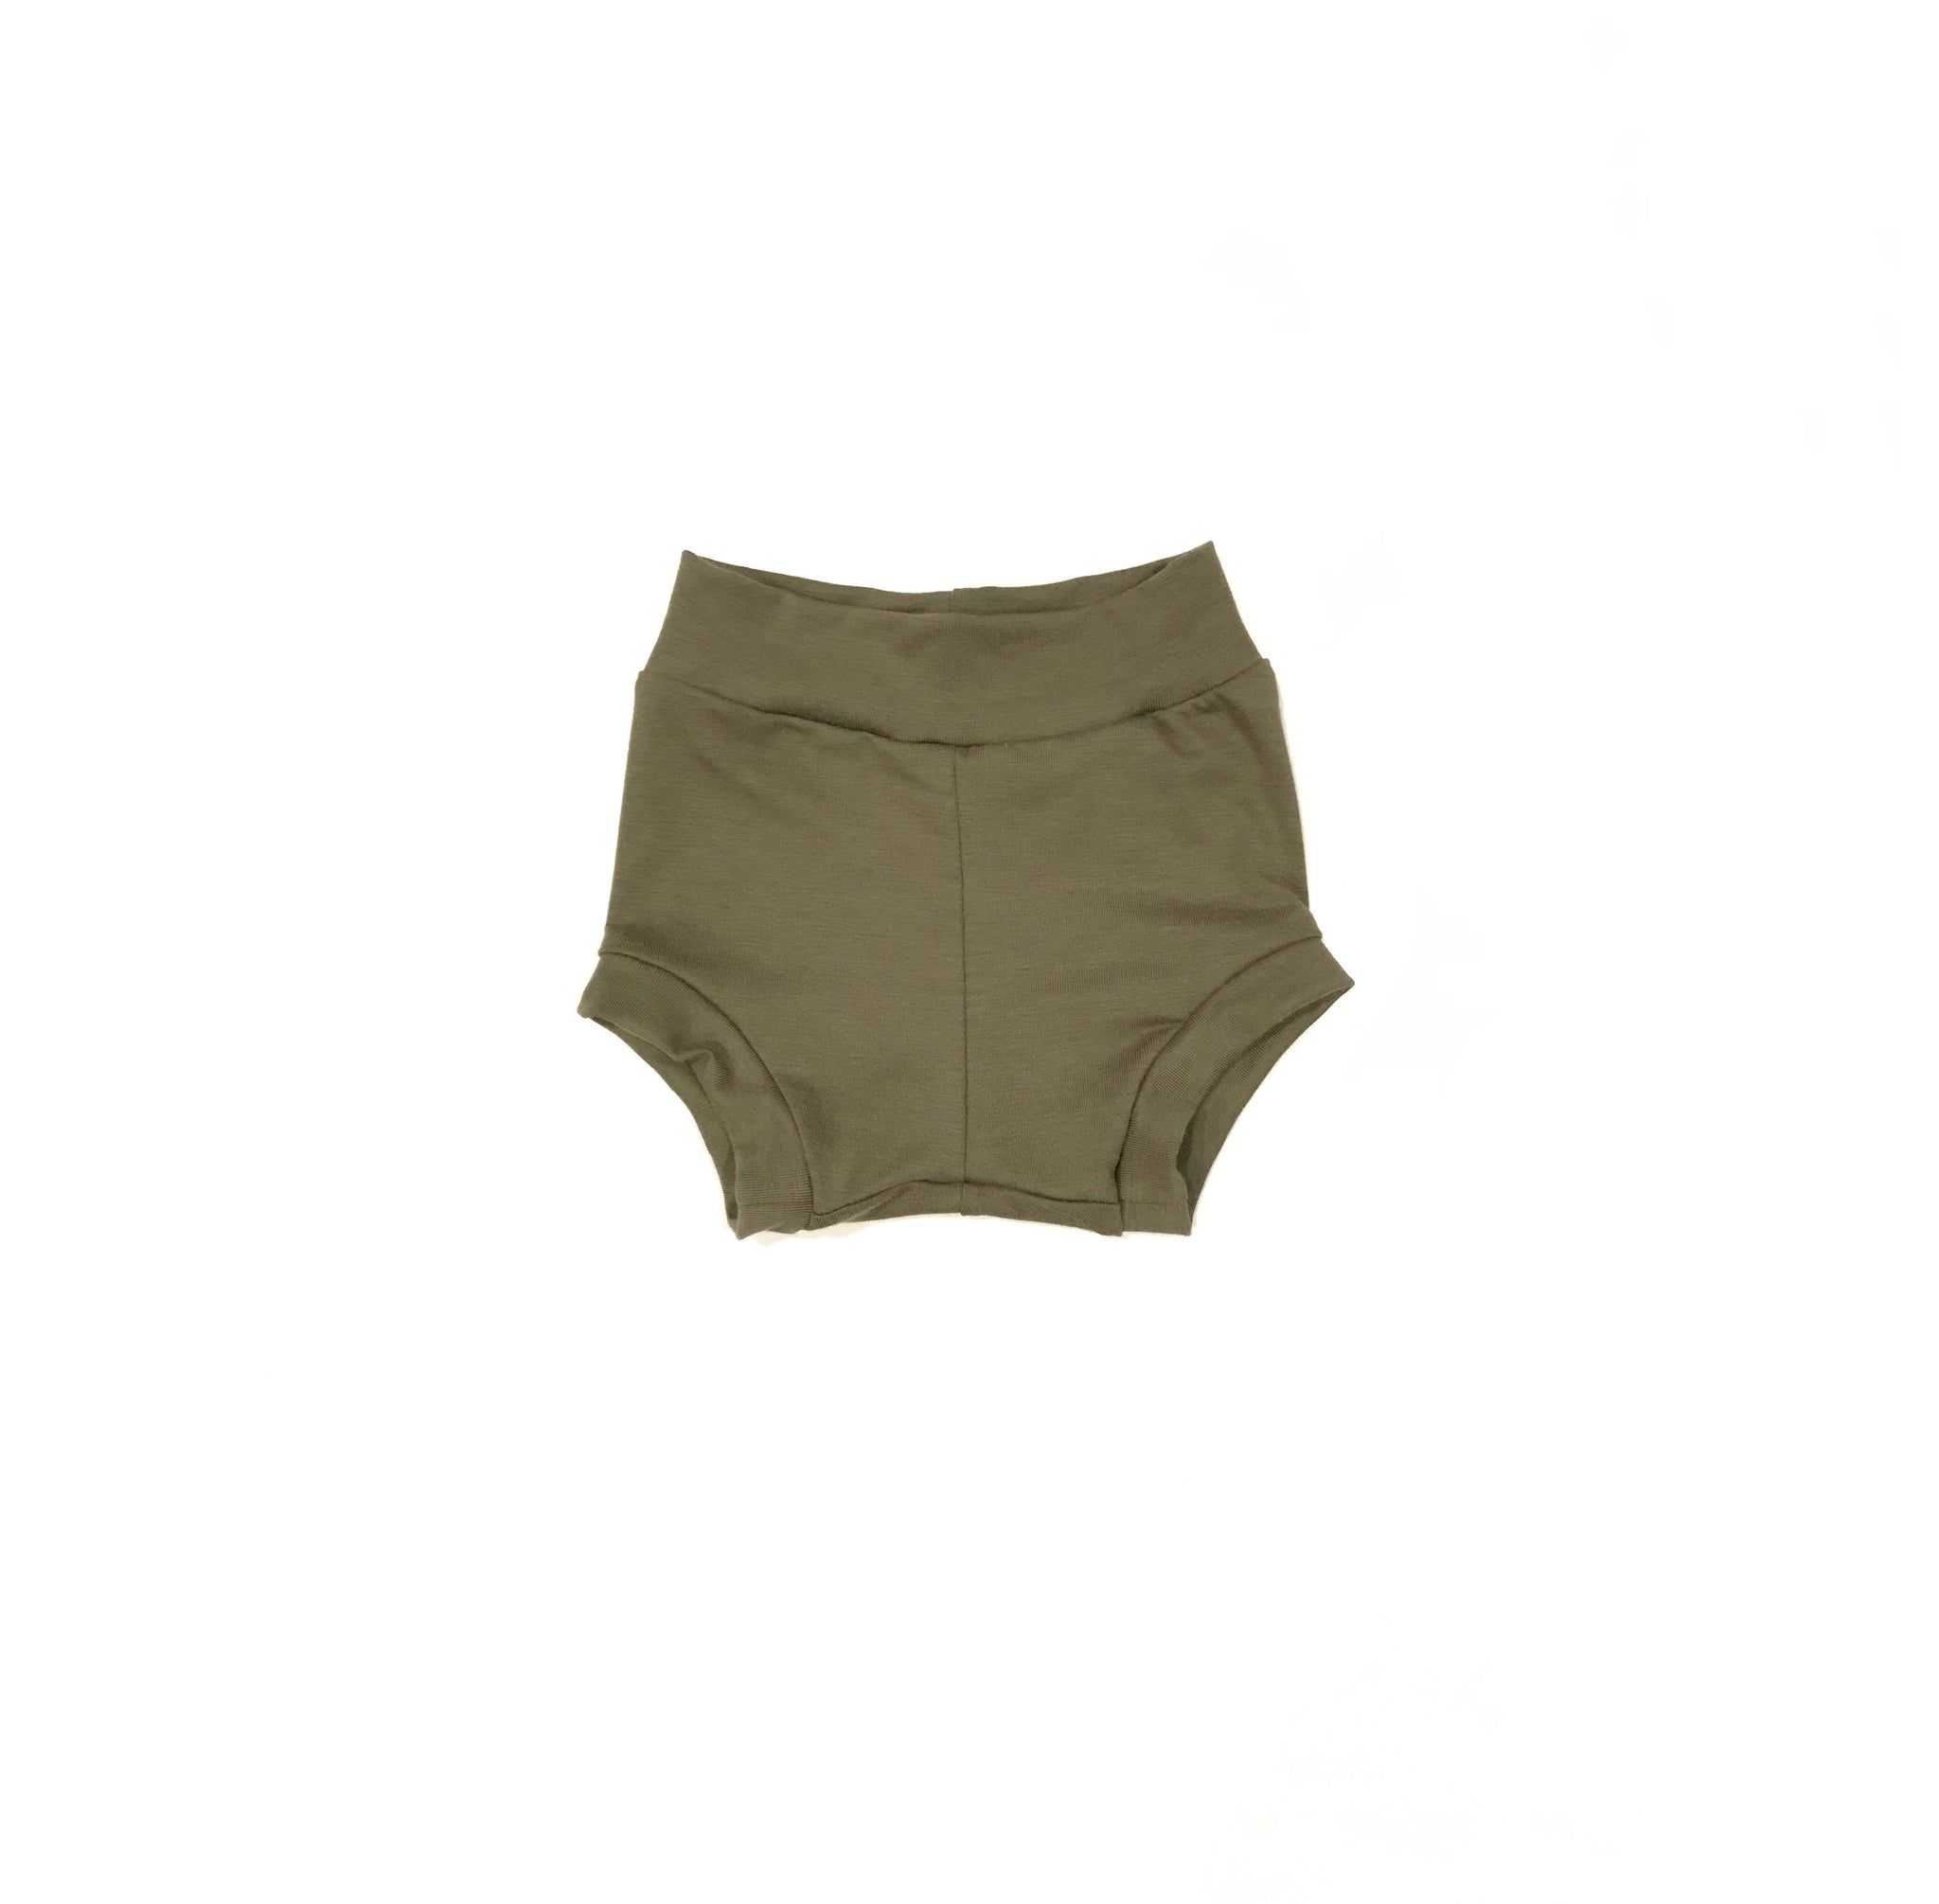 Bamboo Shorties in Soft Olive